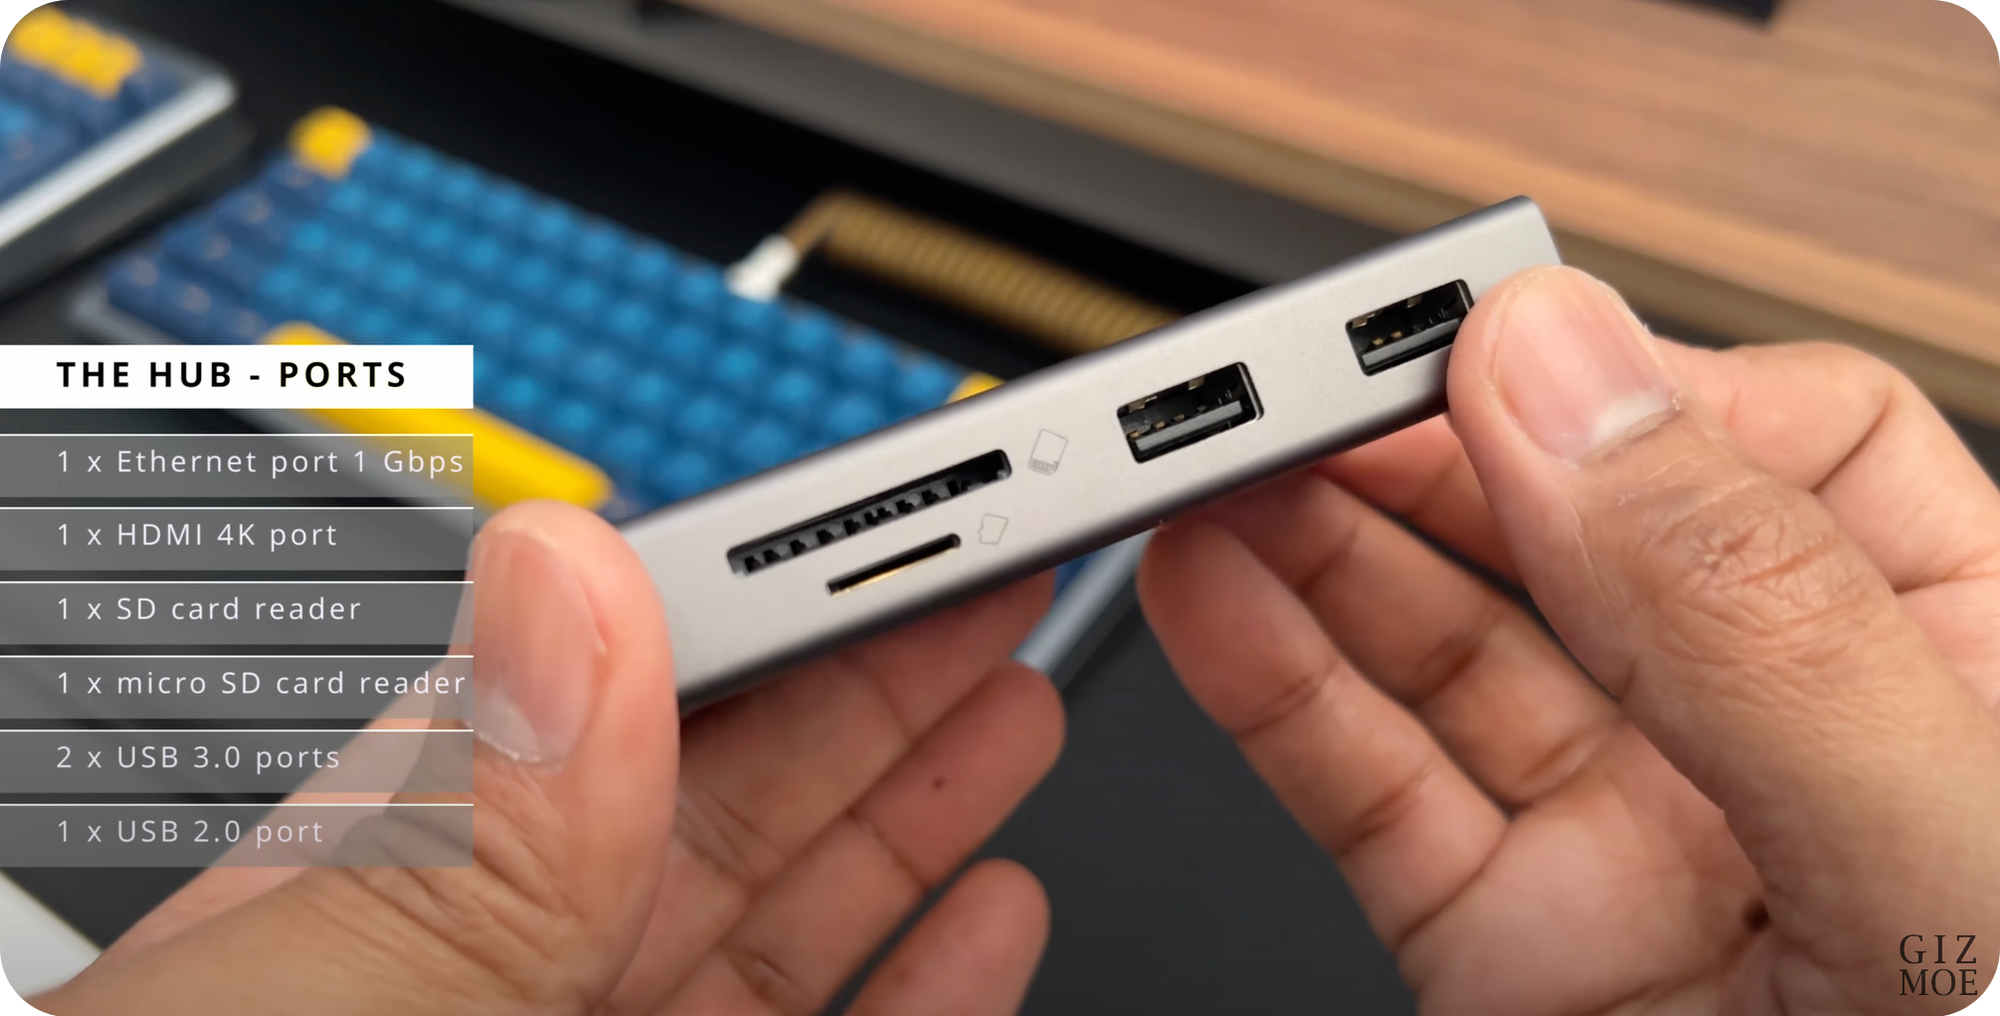 Union Pro USB-C 8 in 1 Hub - Perfect for an iPad or Laptop - Unboxing, Demo and Product Review